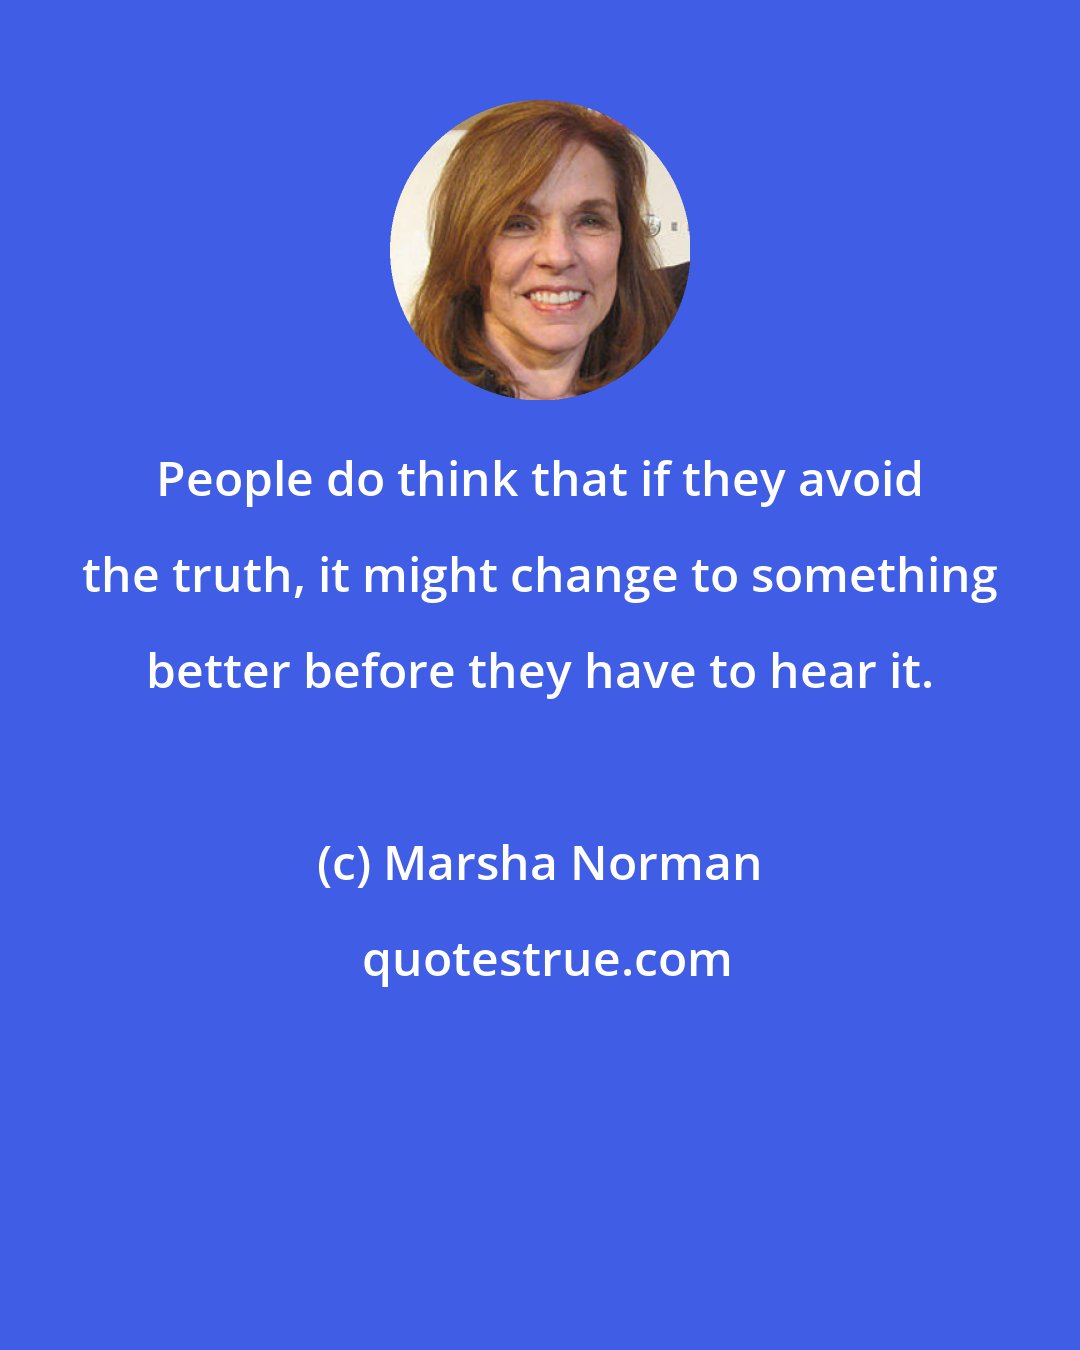 Marsha Norman: People do think that if they avoid the truth, it might change to something better before they have to hear it.